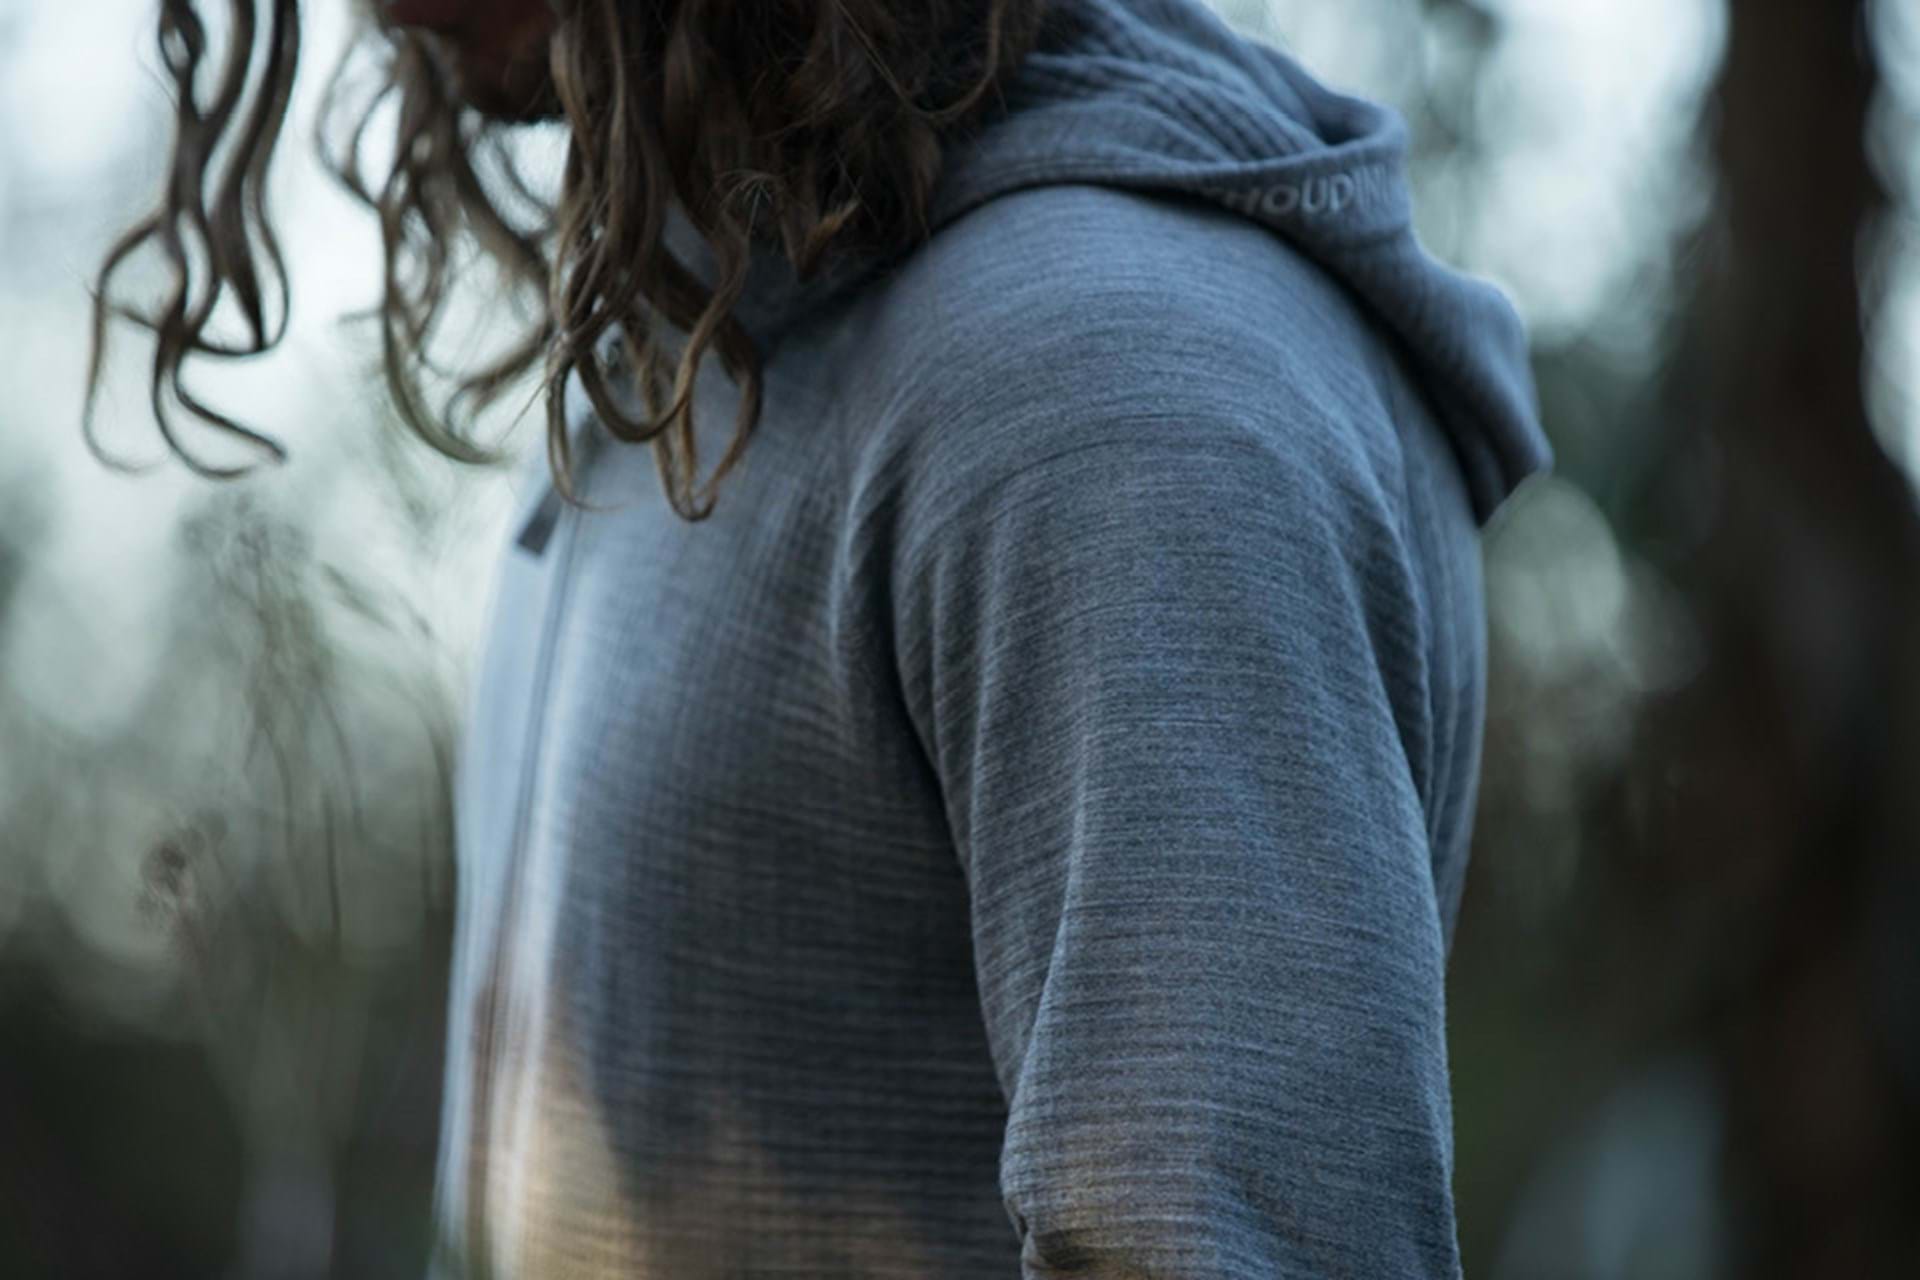 Shop our line of sweaters and hoodies online. Functional, sustainable and warm sweaters, fleece jackets and hoodies for the outdoors. Buy @HoudiniSportswear